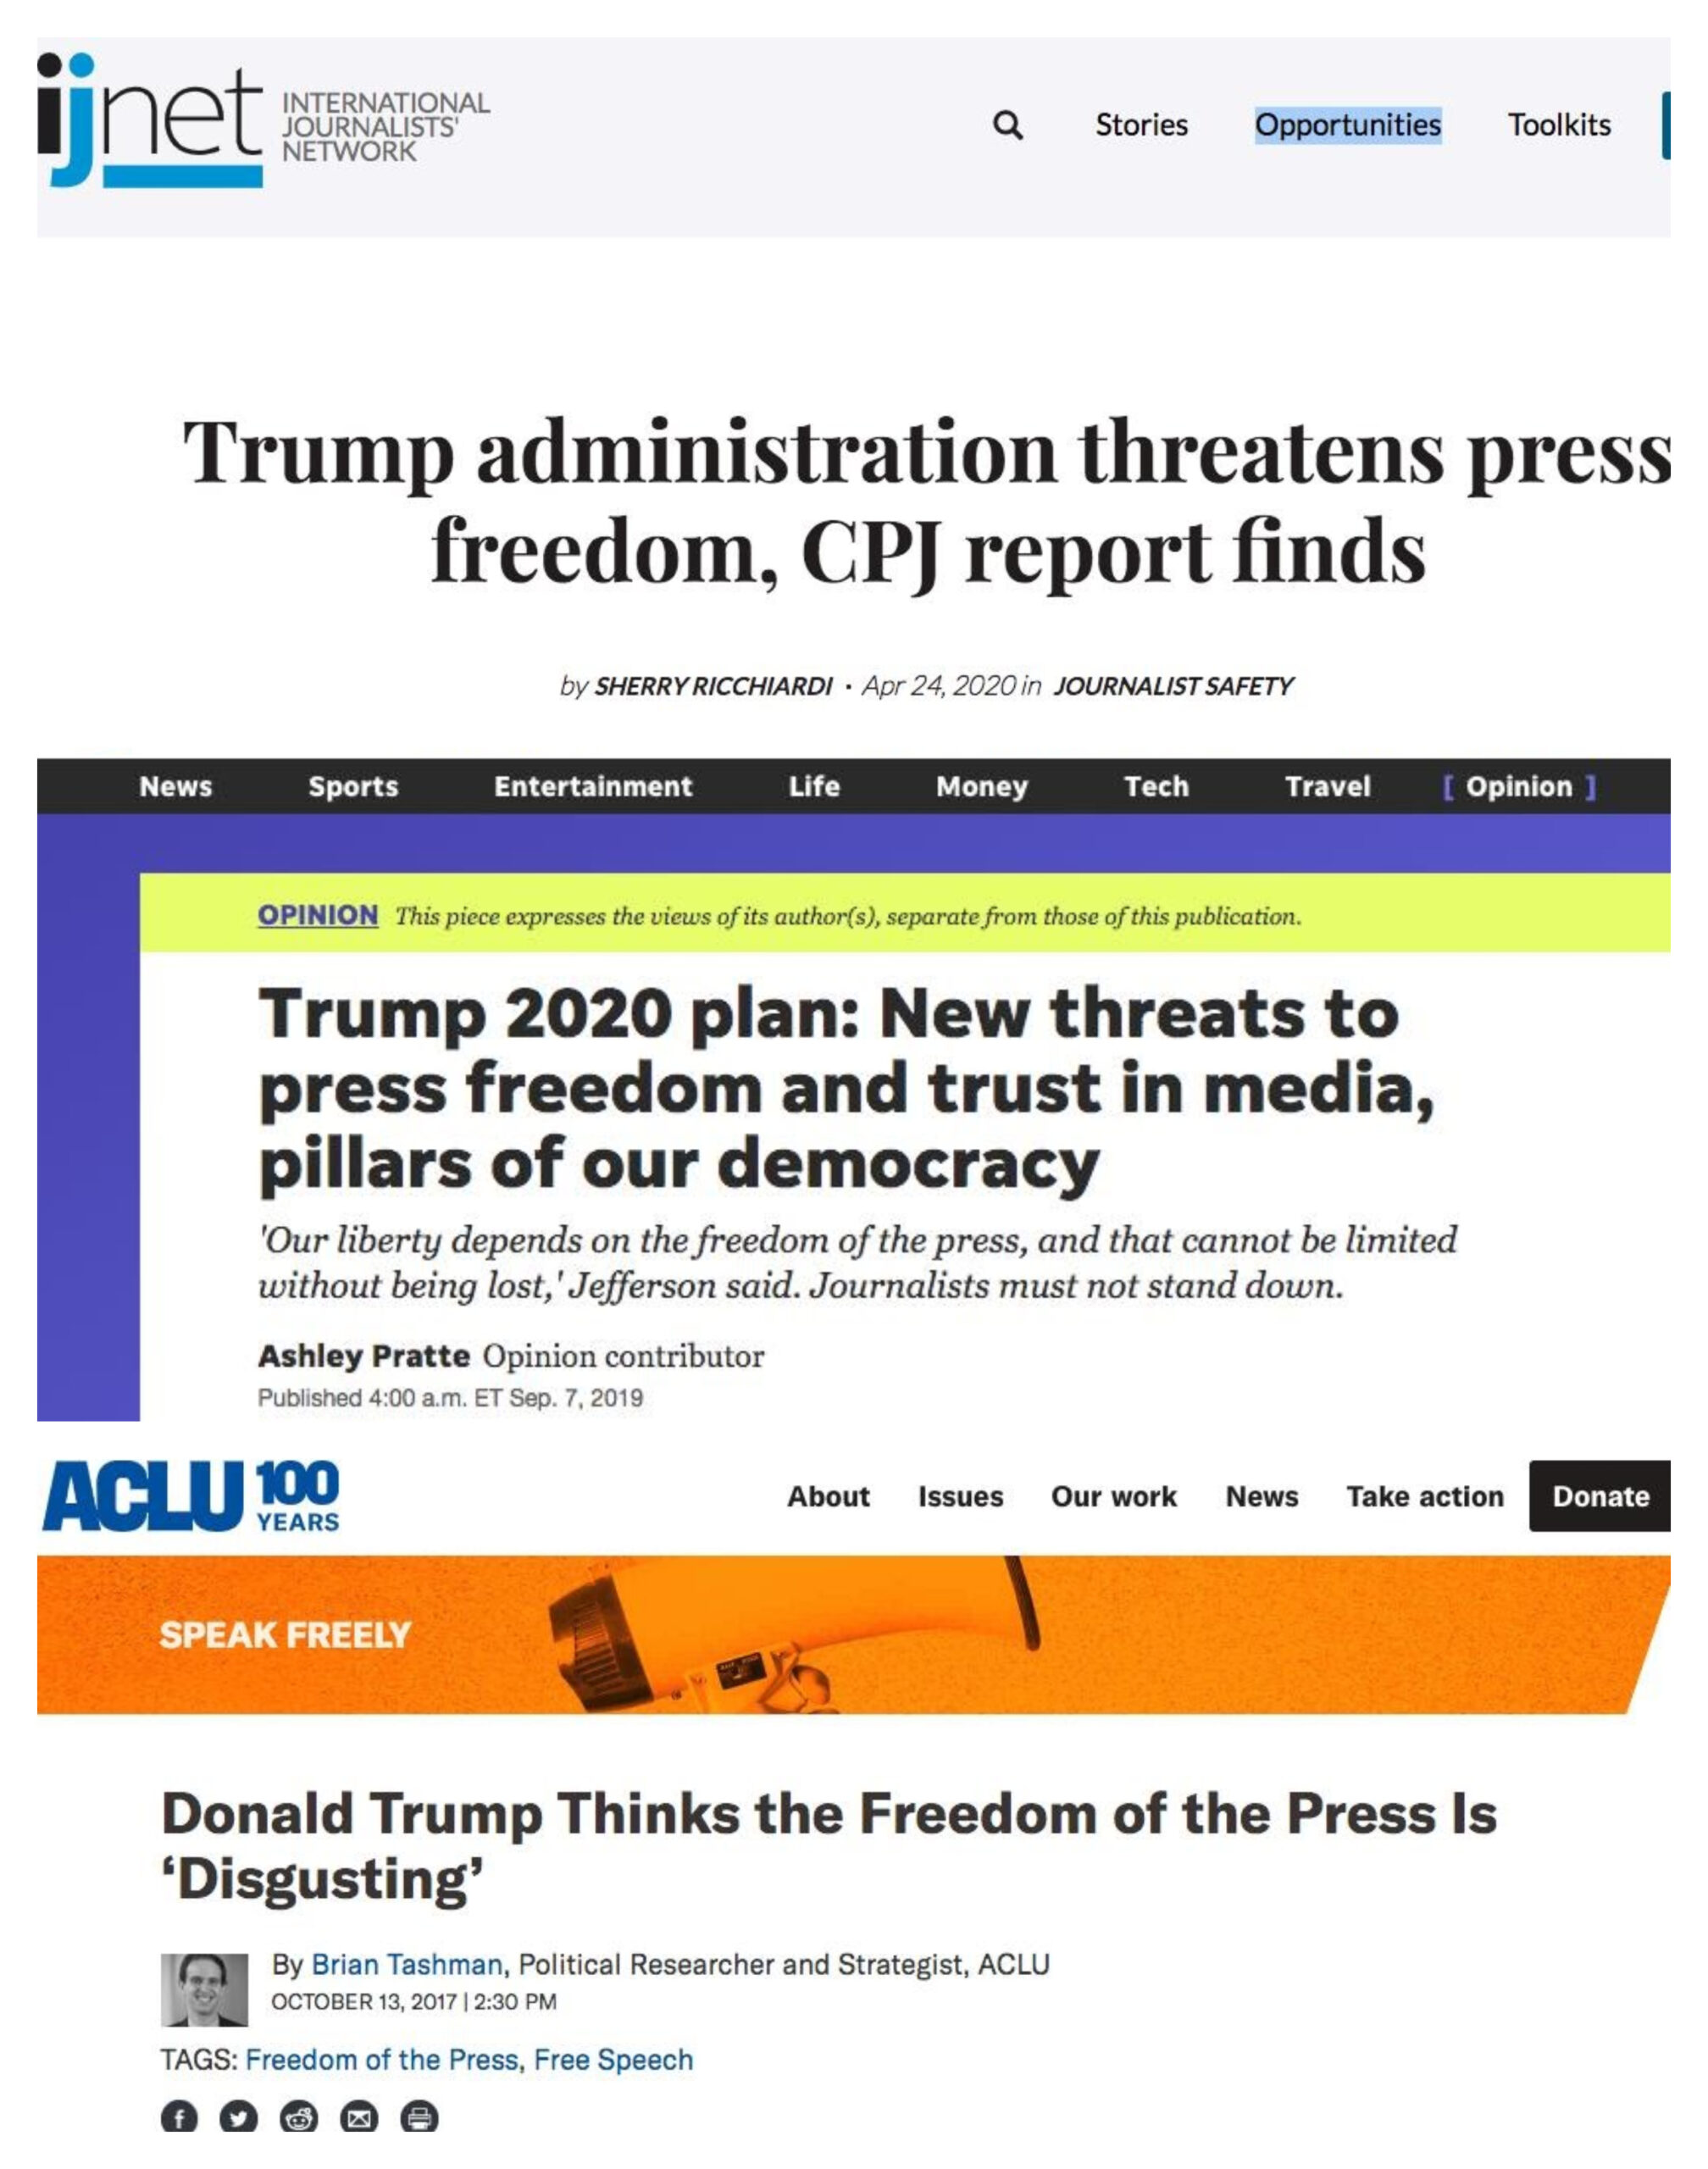 MainstrePress Propam western media and institutions have clung to the narrative that press freedoms have been abruptly undermined since the rise of Donald Trump as the president of the United States. Goebbels, however, professed a more collaborative relationship between the holders of power and the fifth estate.